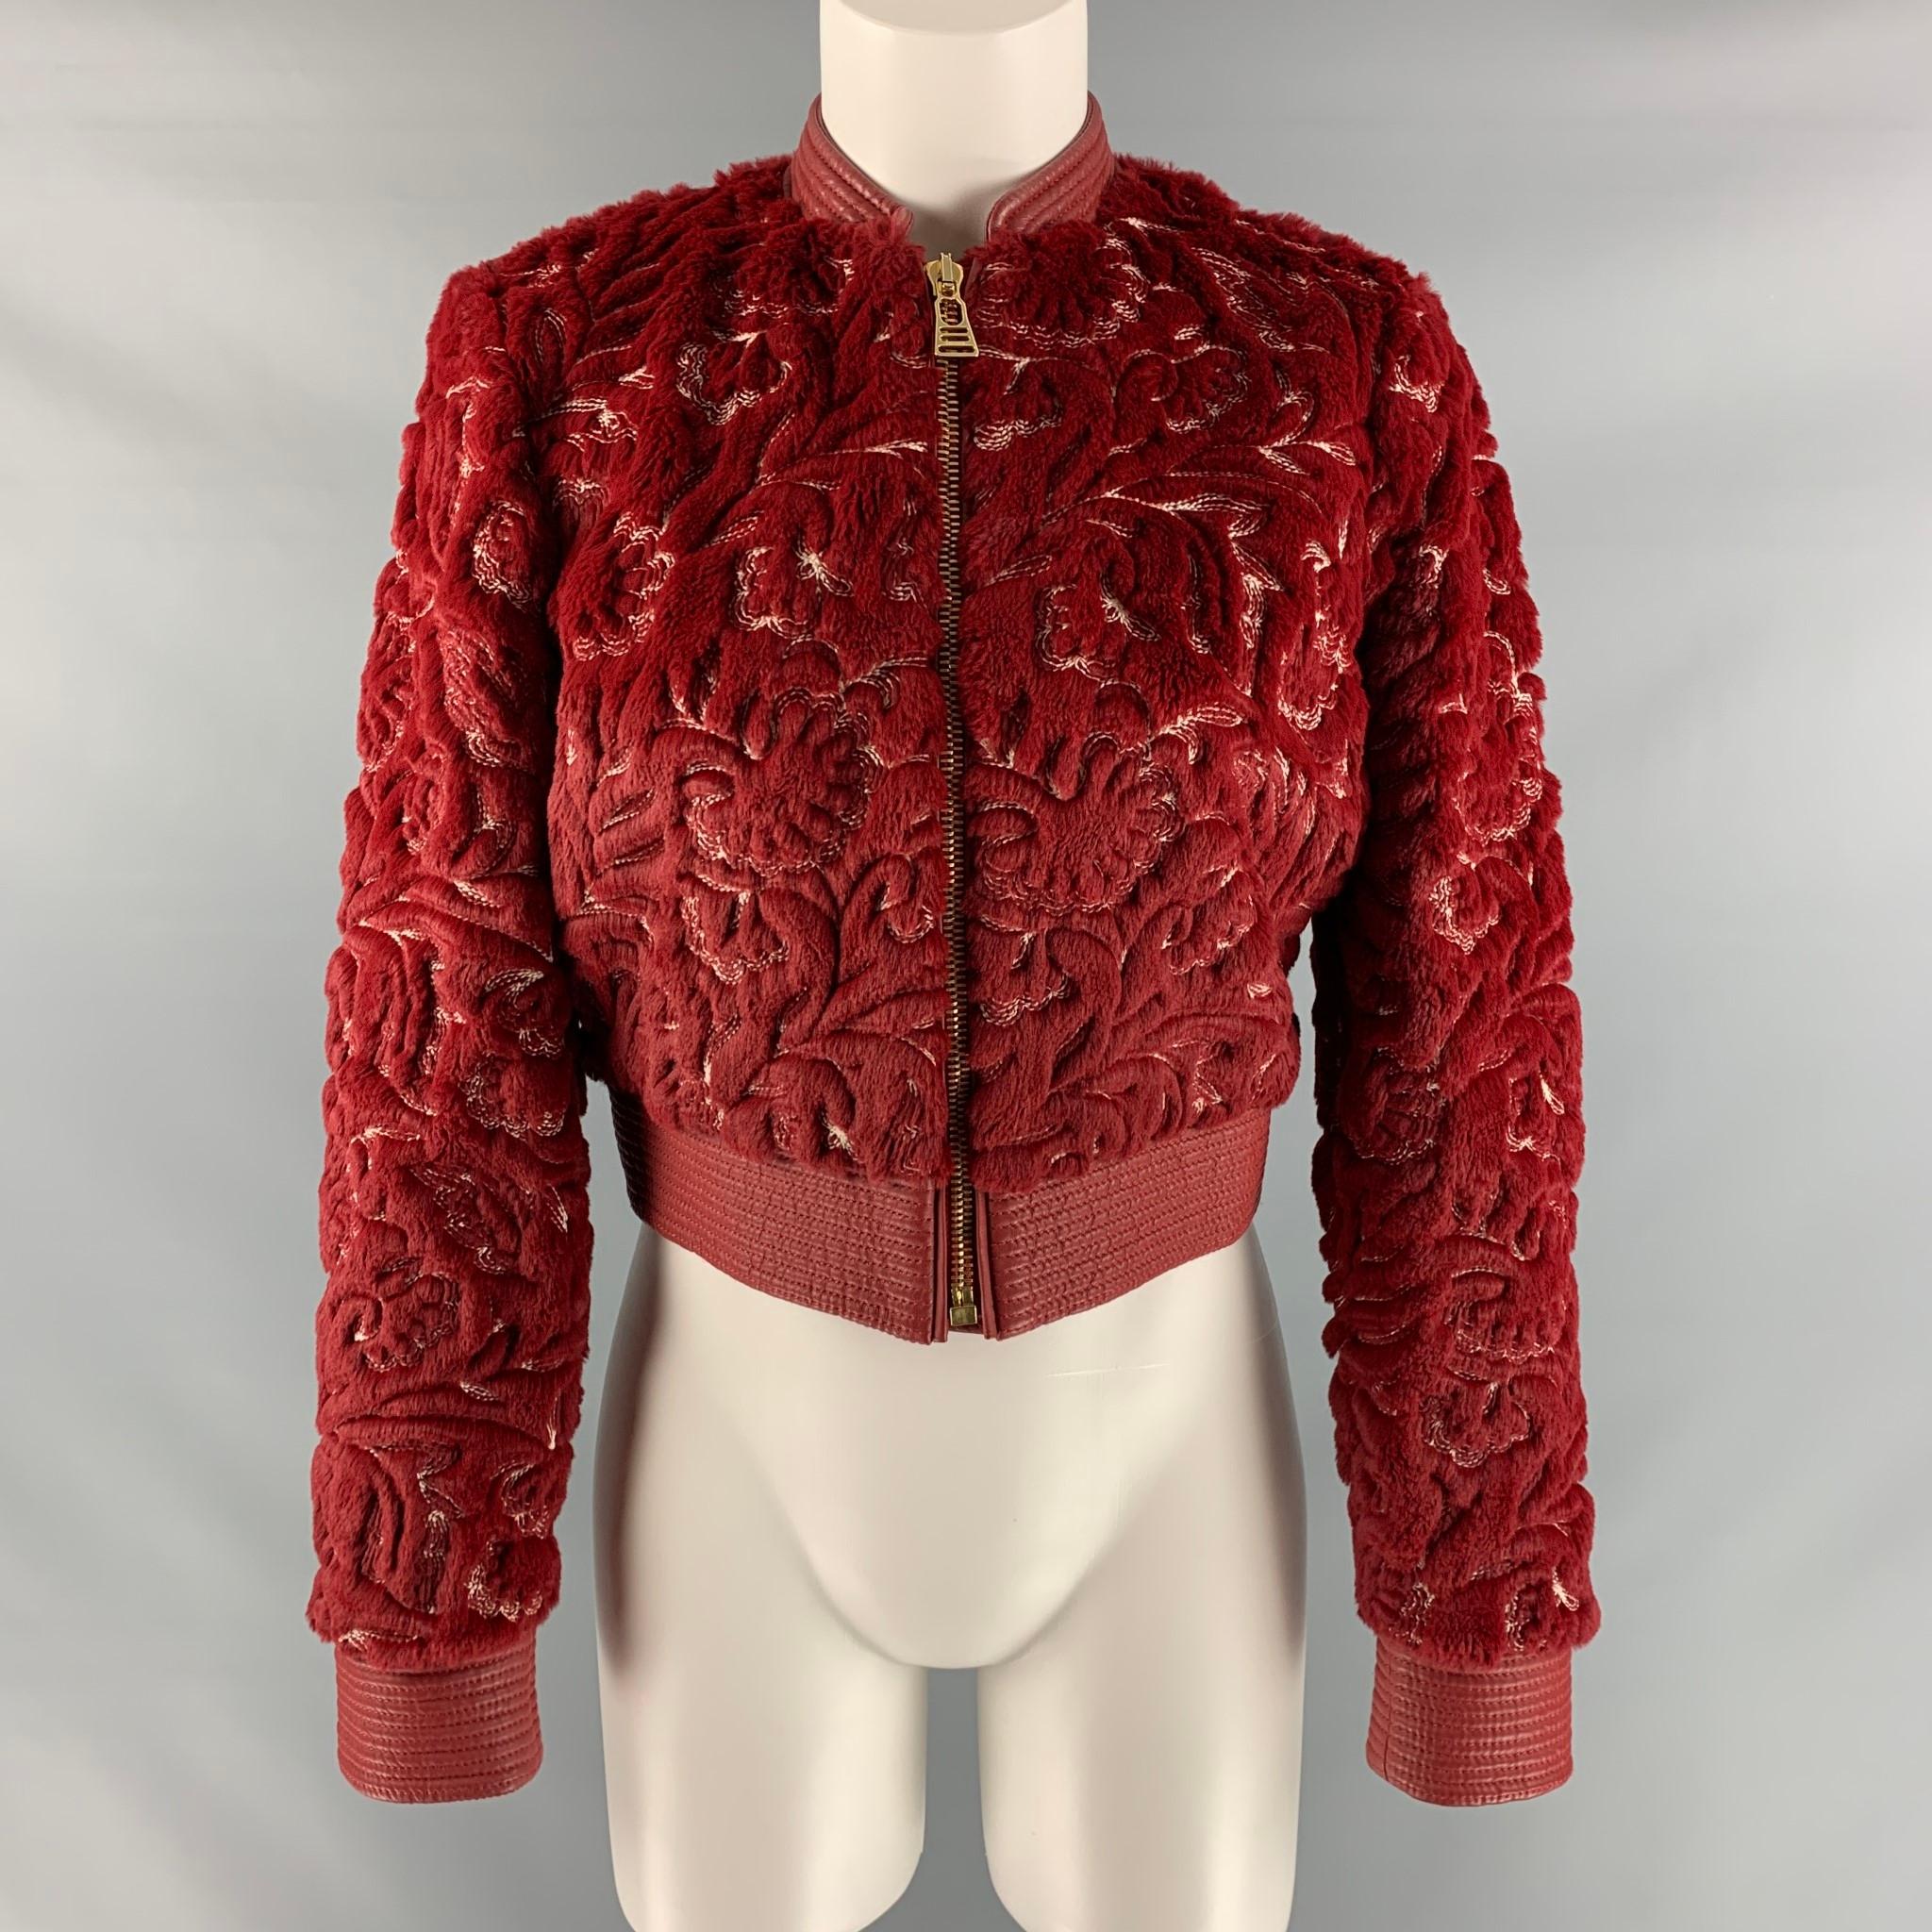 LA PERLA jacket comes in a red and white faux fur polyester and cotton with a full liner featuring a bomber style, leather trim, embroidered details throughout, slit pockets, and a gold toe zip up closure. Made in Italy.

Excellent Pre- Owned